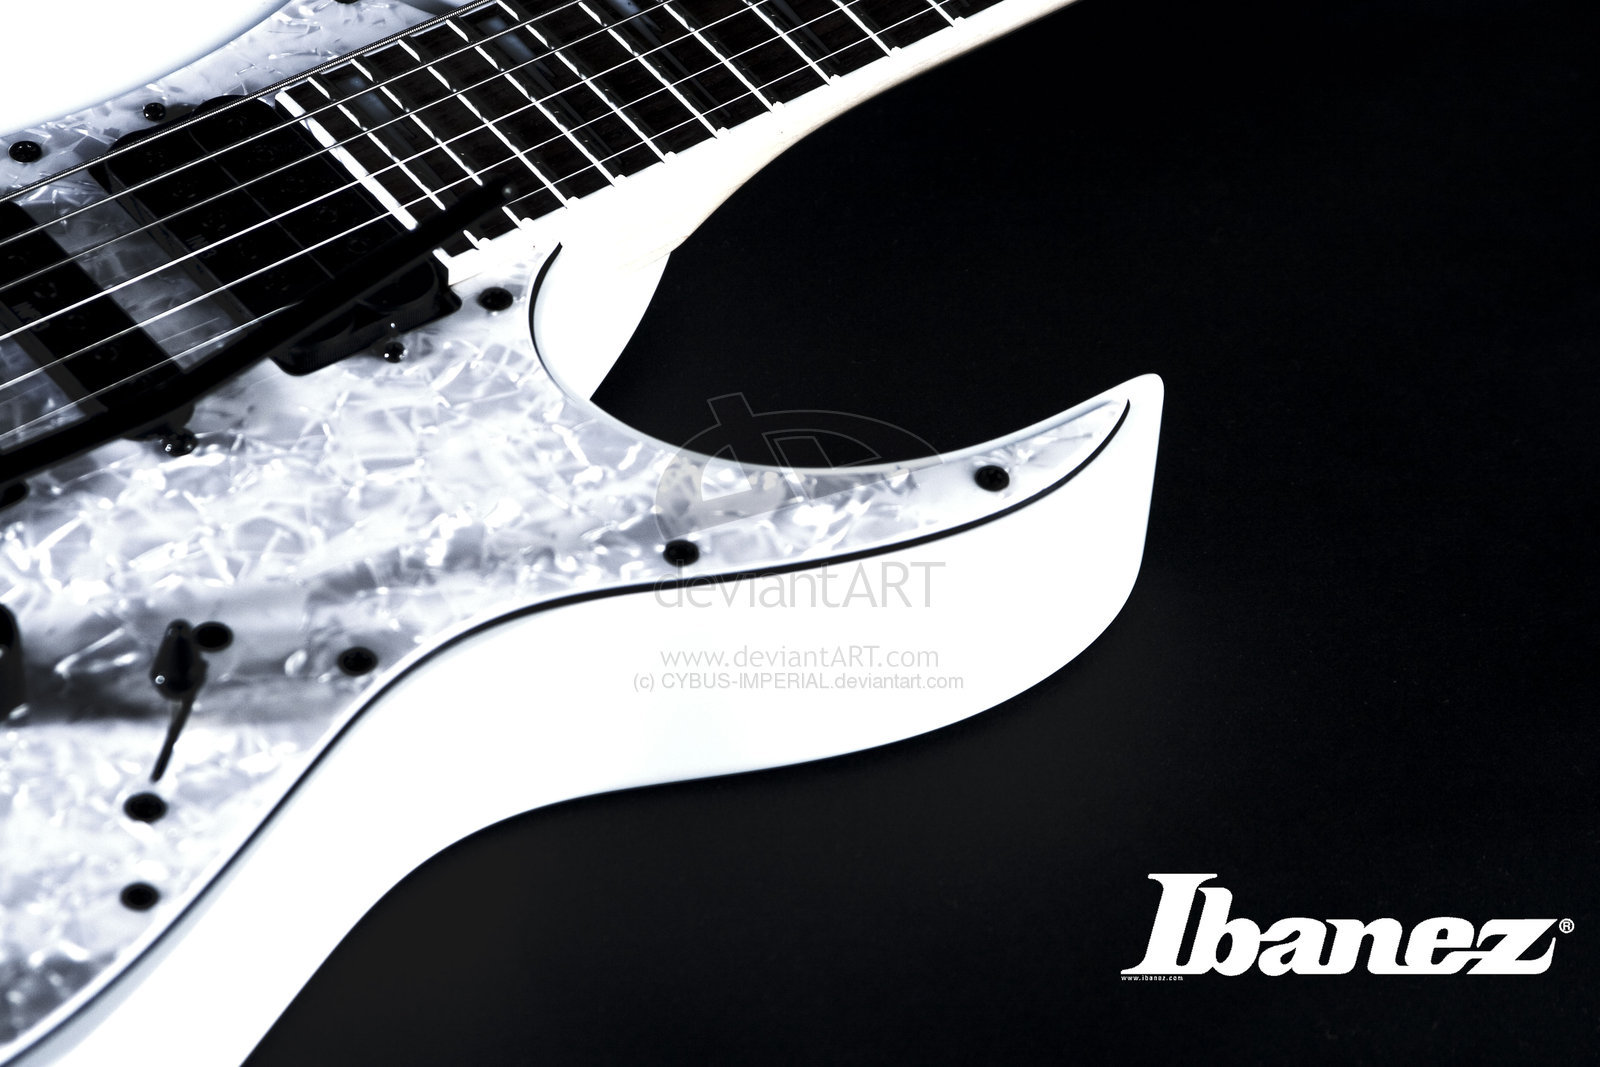 Ibanez Rg Wallpaper Image Amp Pictures Becuo